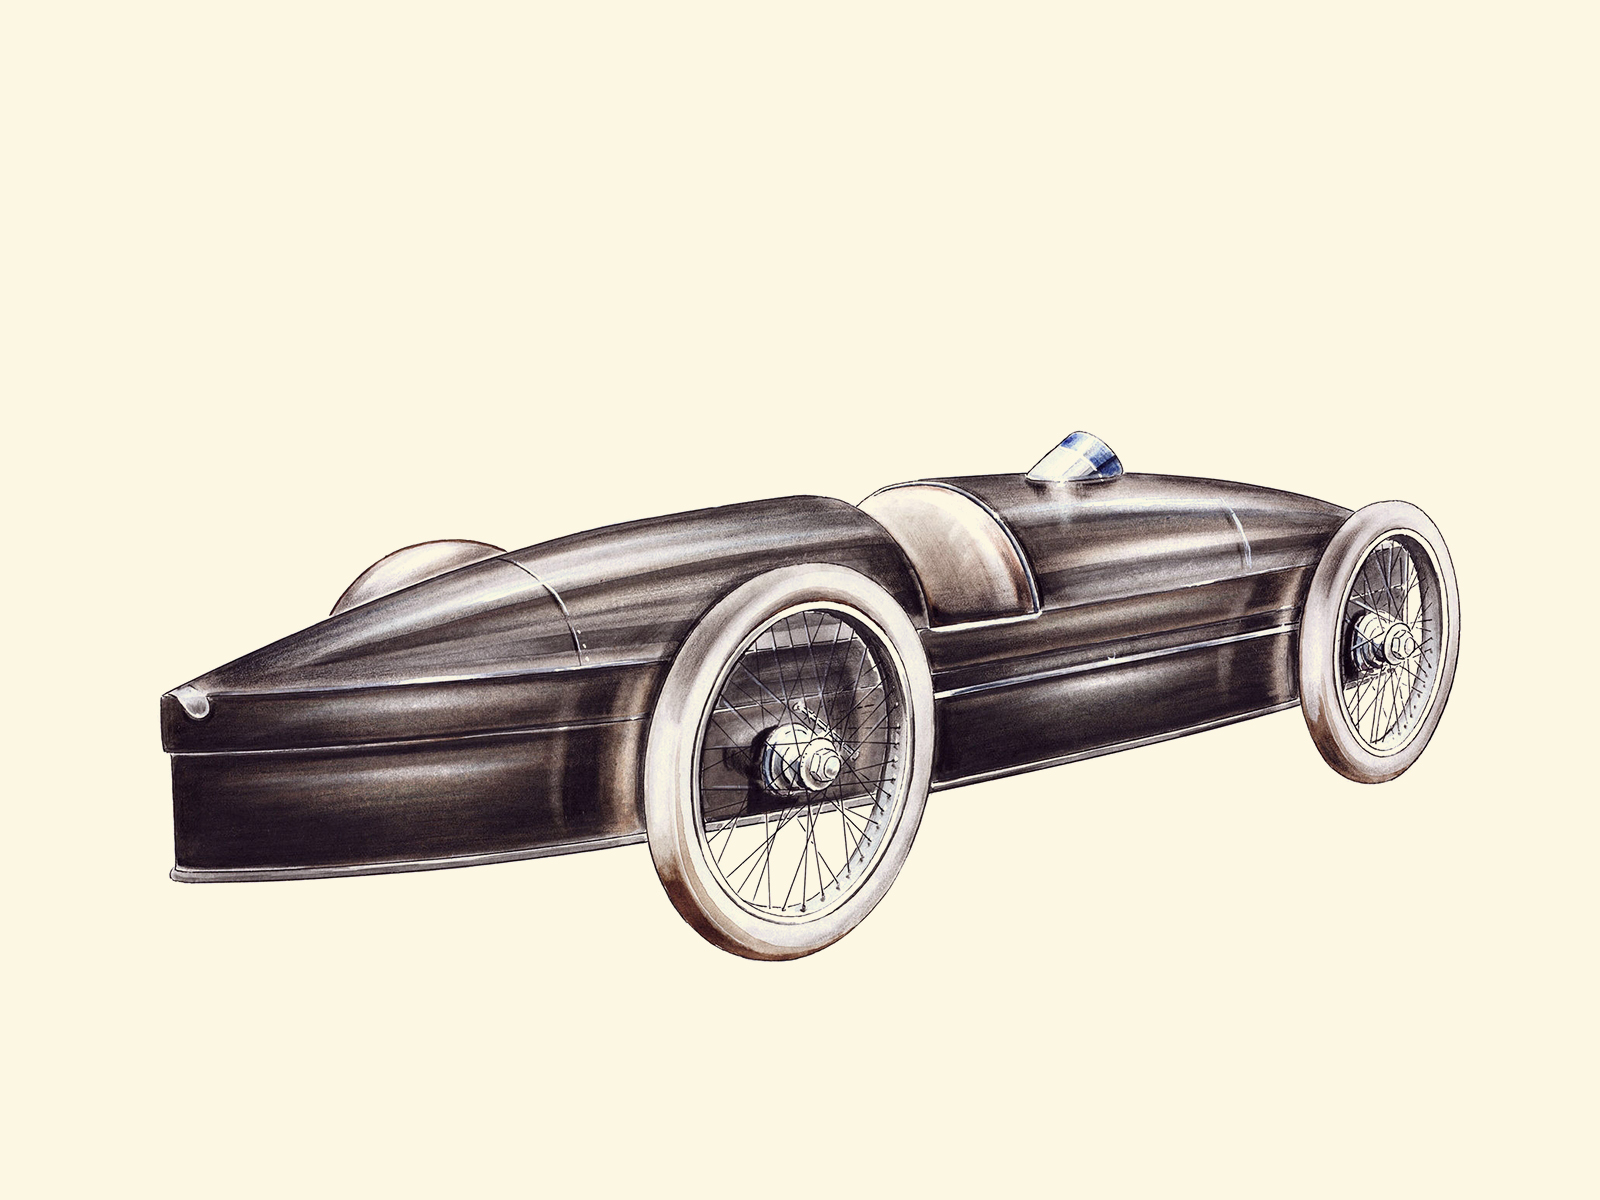 1906 Stanley (F. Marriott 127.66 mph): Illustrated by Piet Olyslager